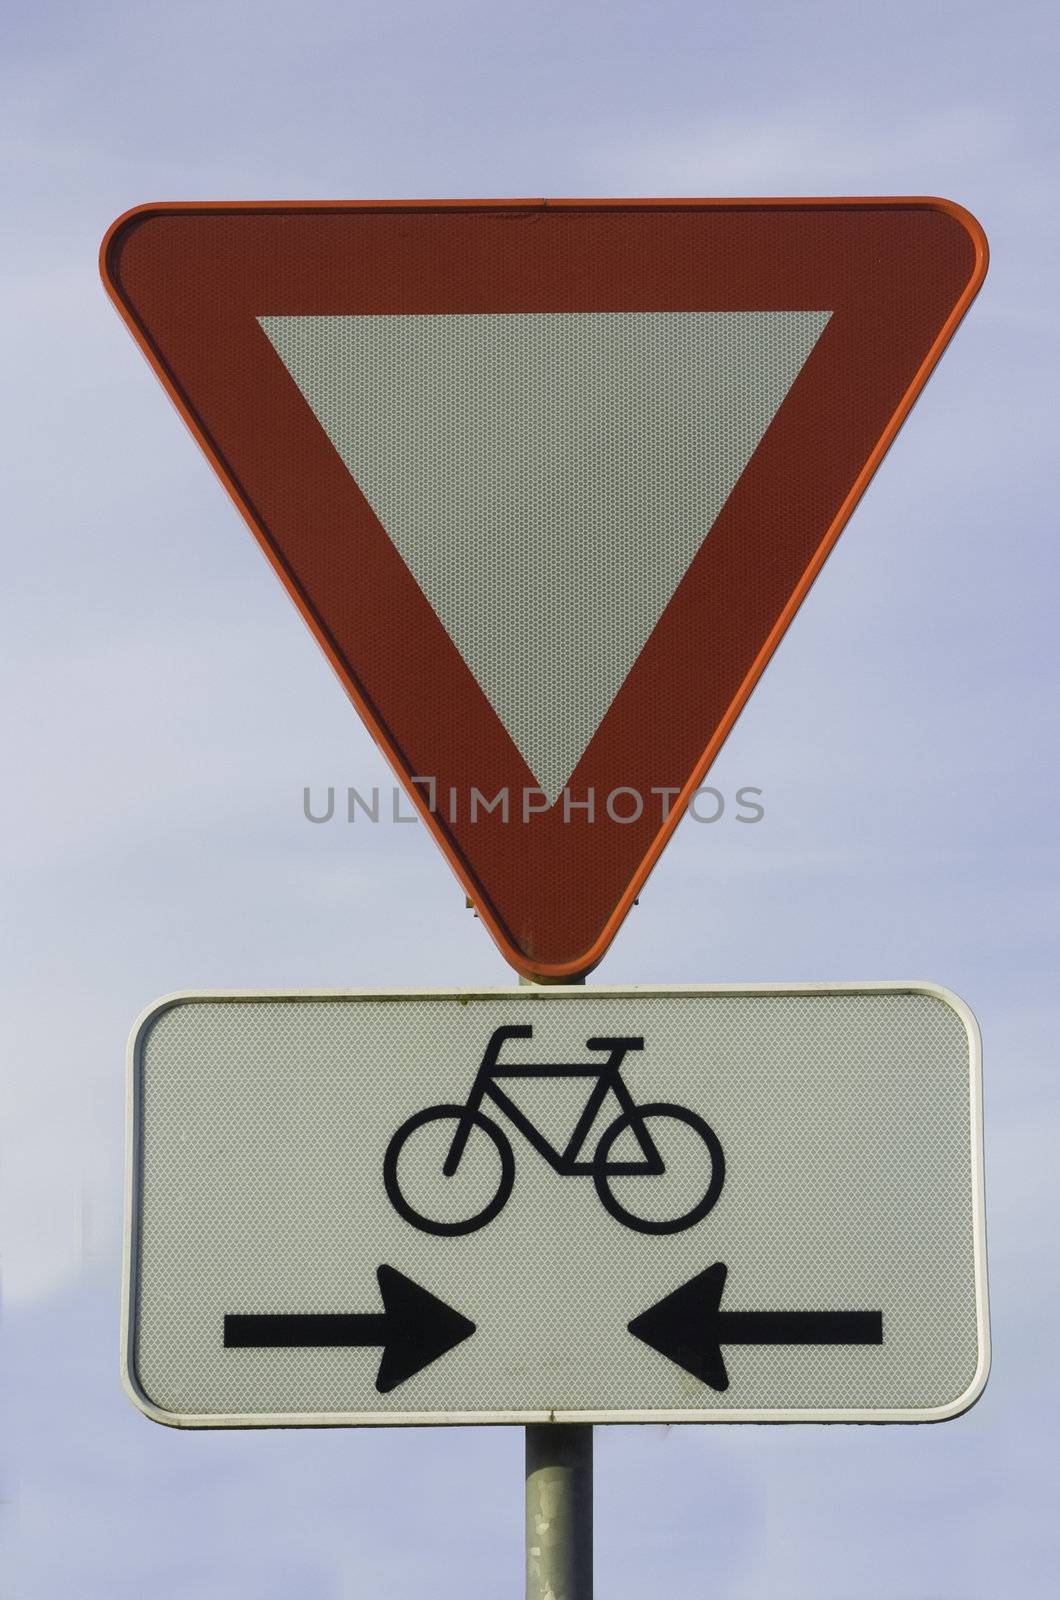 Dutch traffic sign, bicycle priority